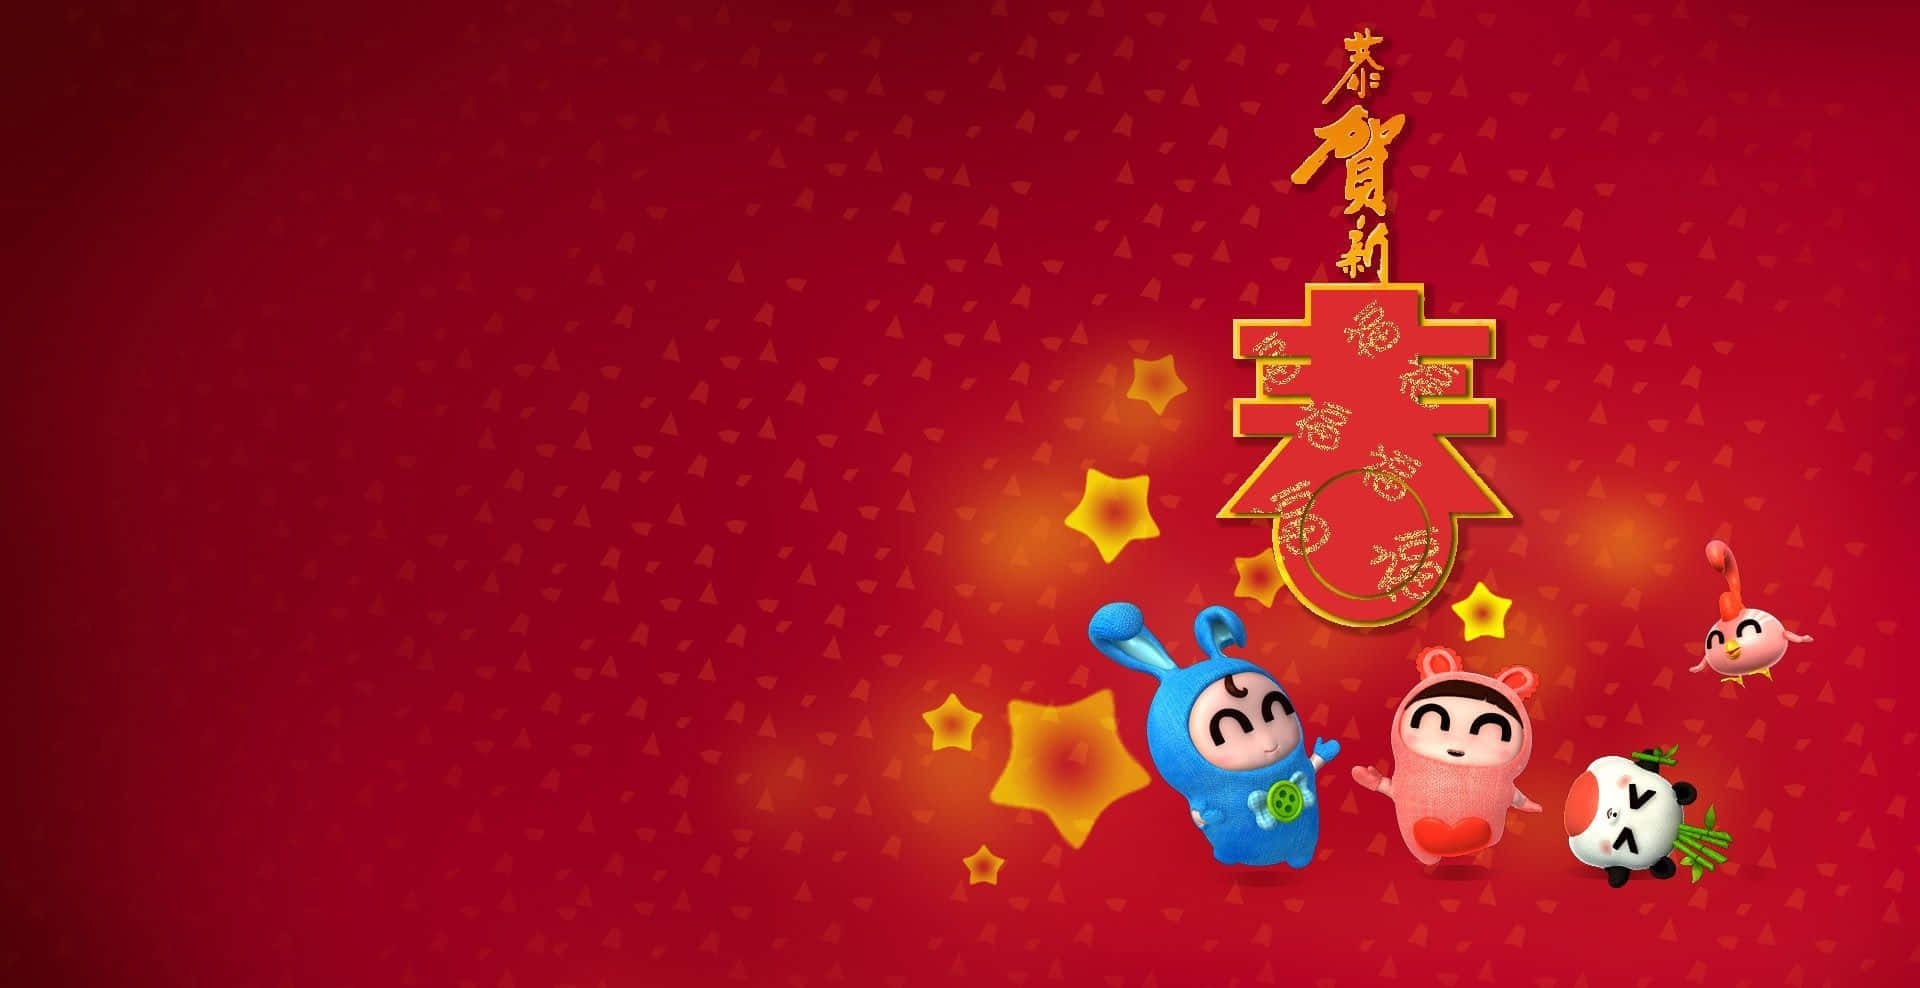 Celebrate the start of a brand new year with the Chinese New Year.